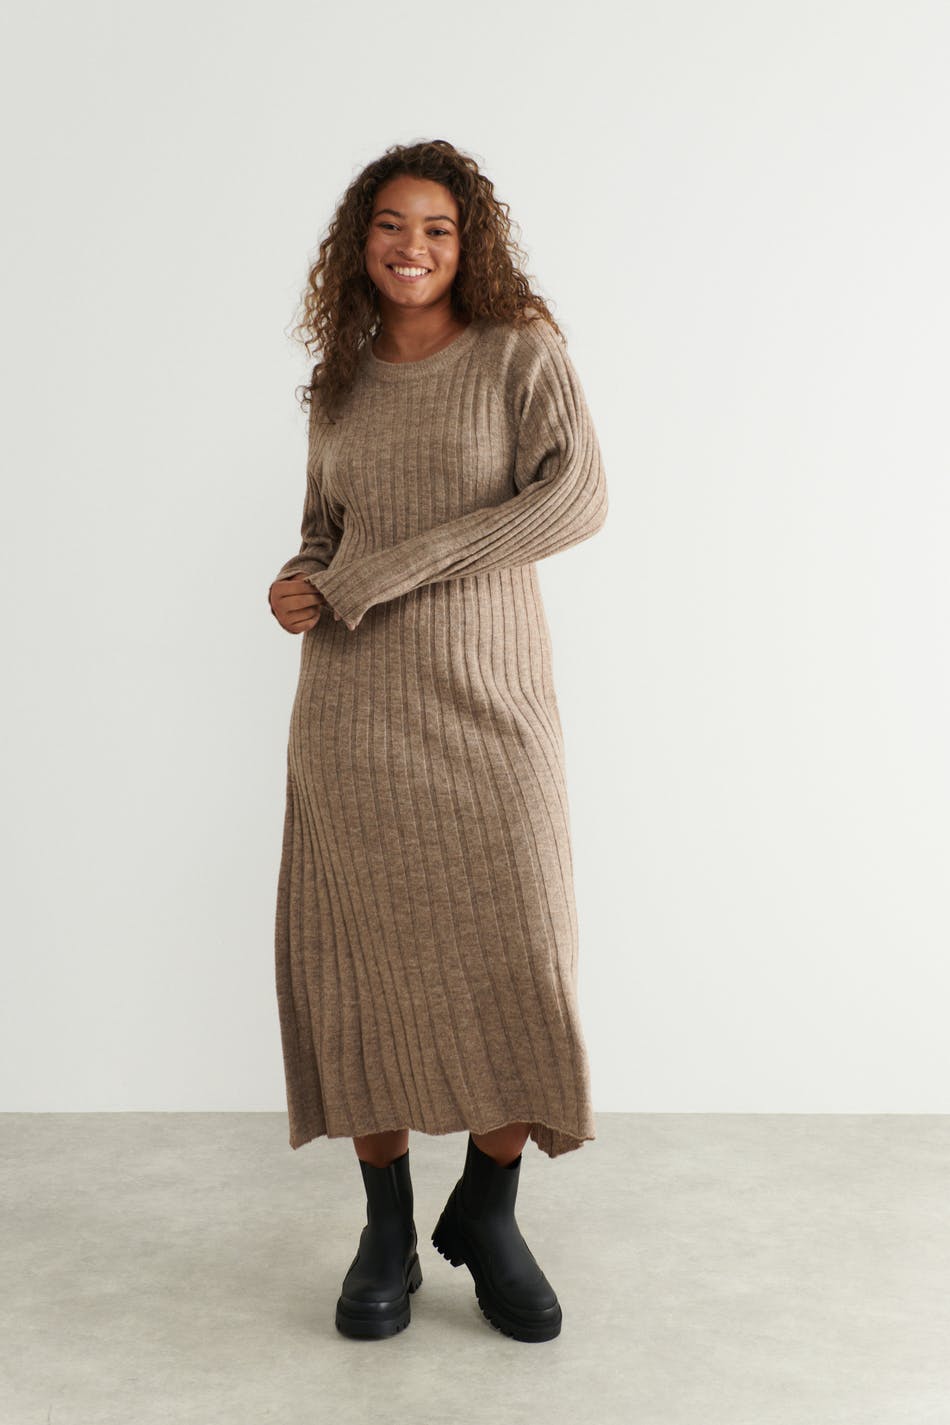 Blanca knitted dress, Gina Tricot